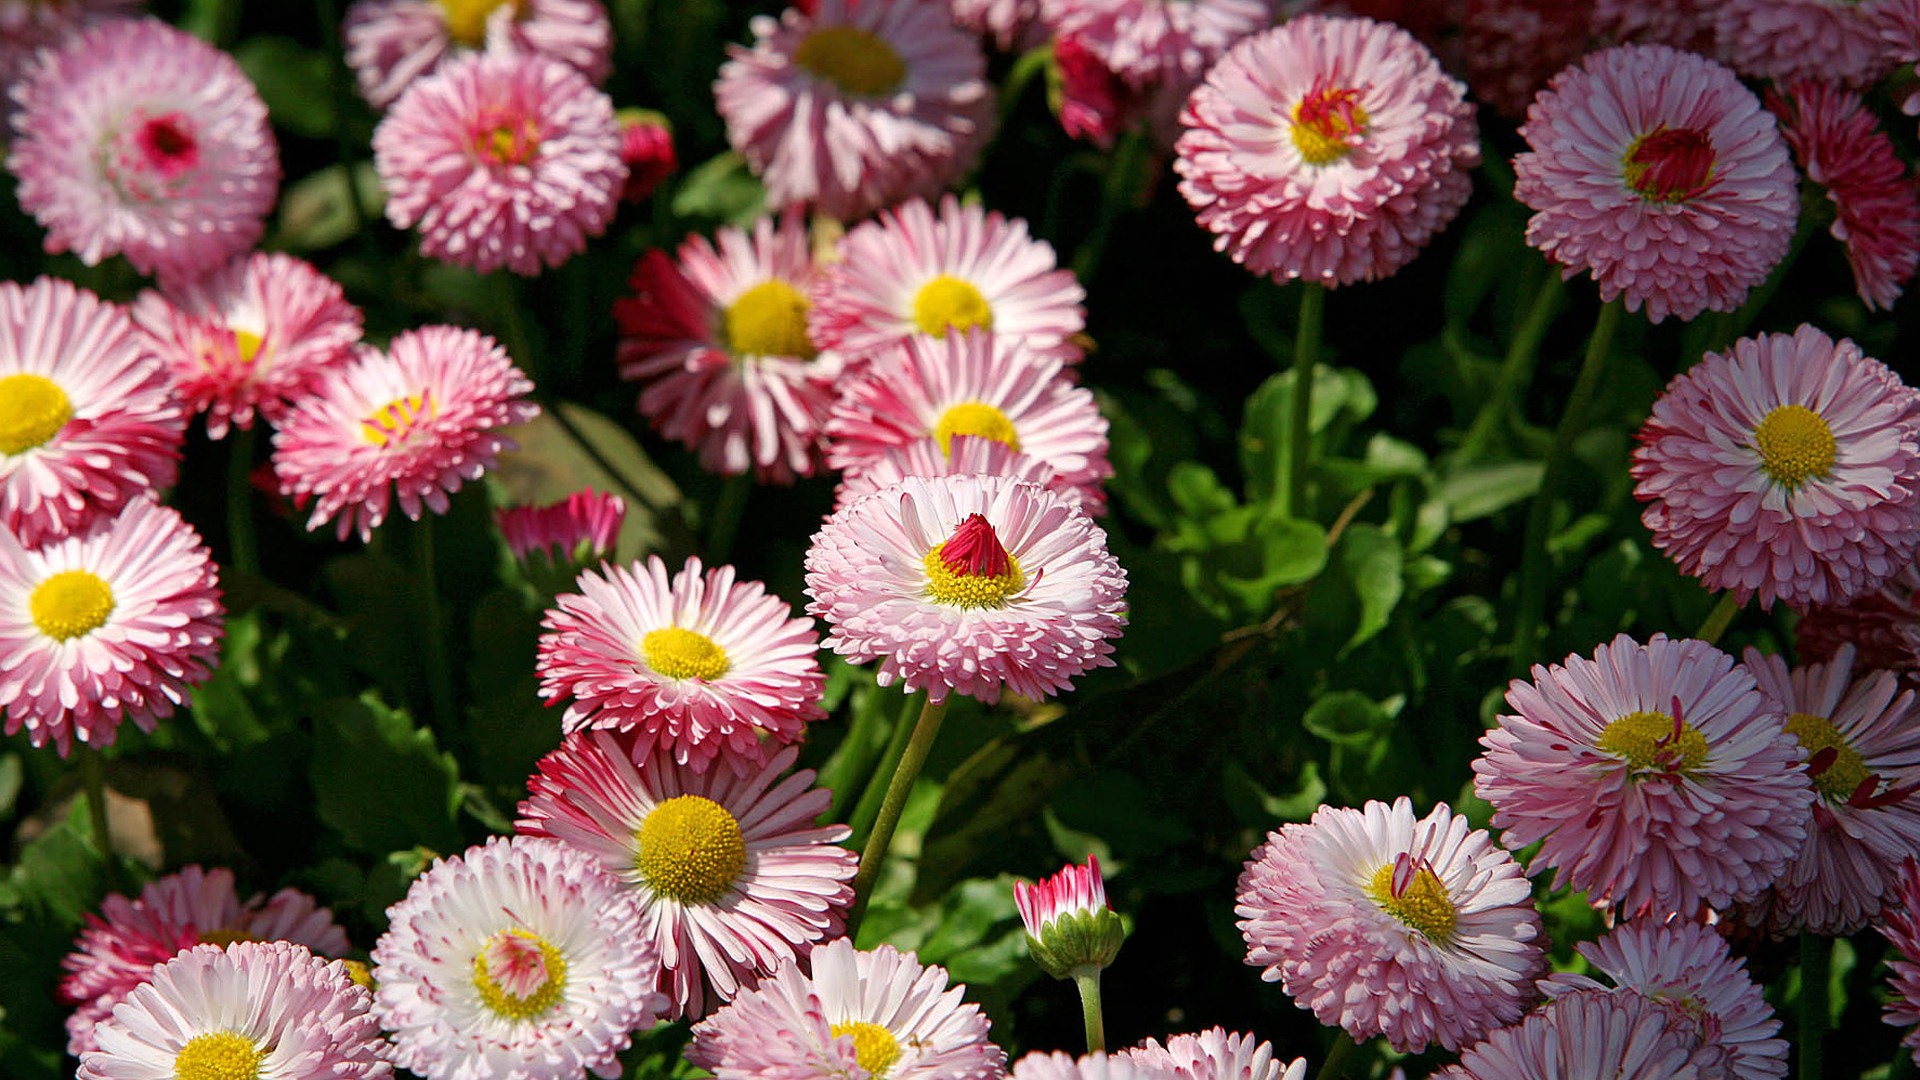 Daisies flowers close-up HD wallpapers #17 - 1920x1080